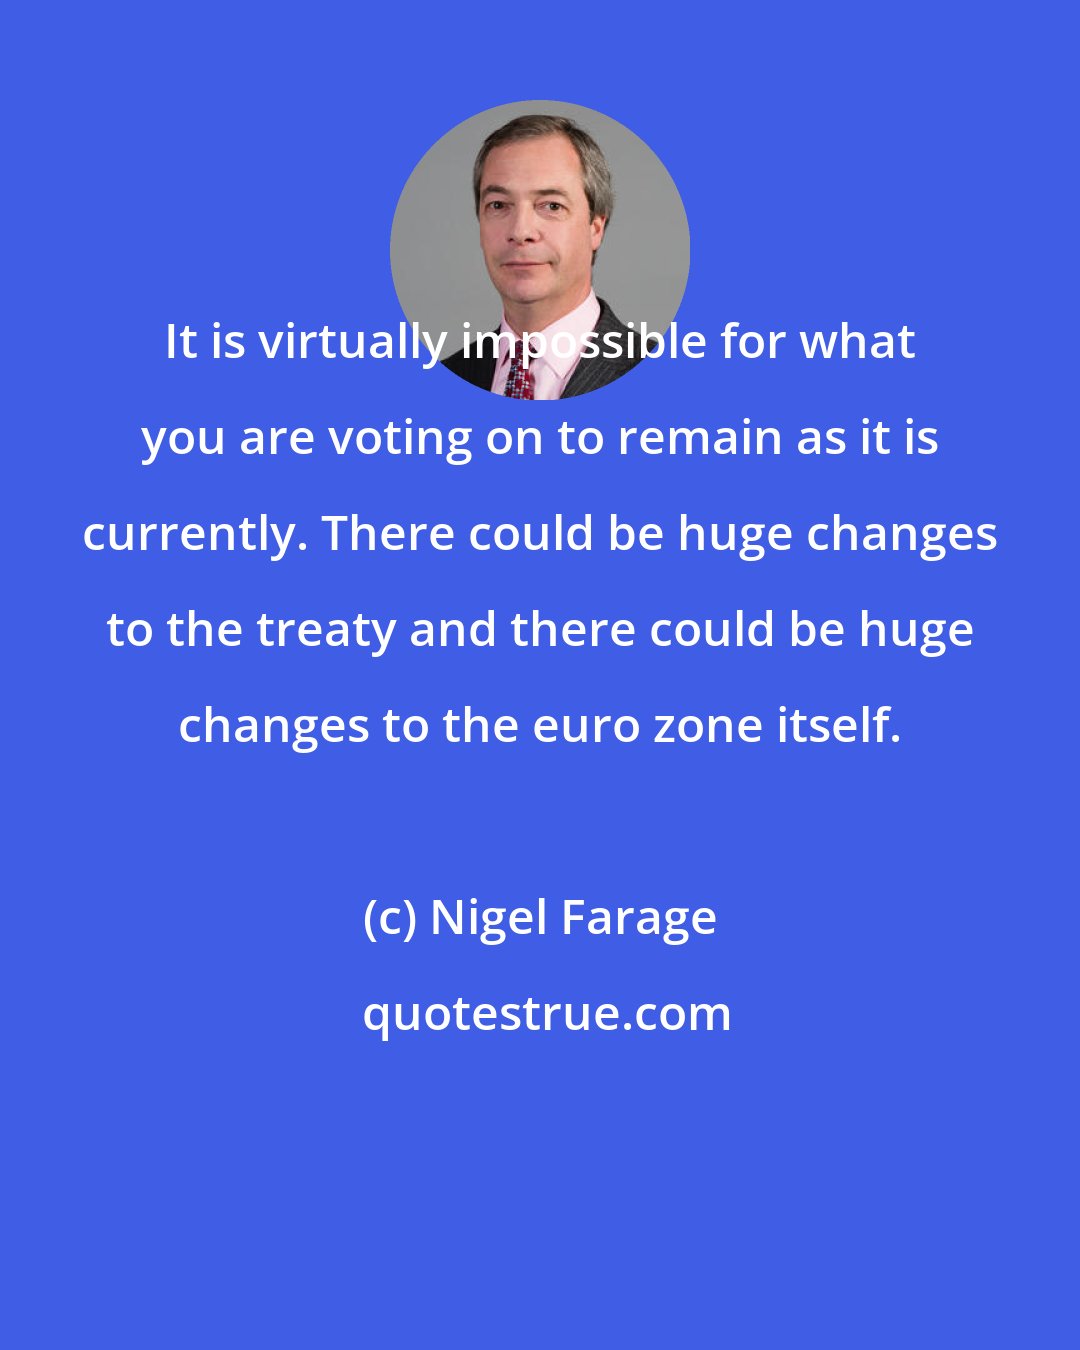 Nigel Farage: It is virtually impossible for what you are voting on to remain as it is currently. There could be huge changes to the treaty and there could be huge changes to the euro zone itself.